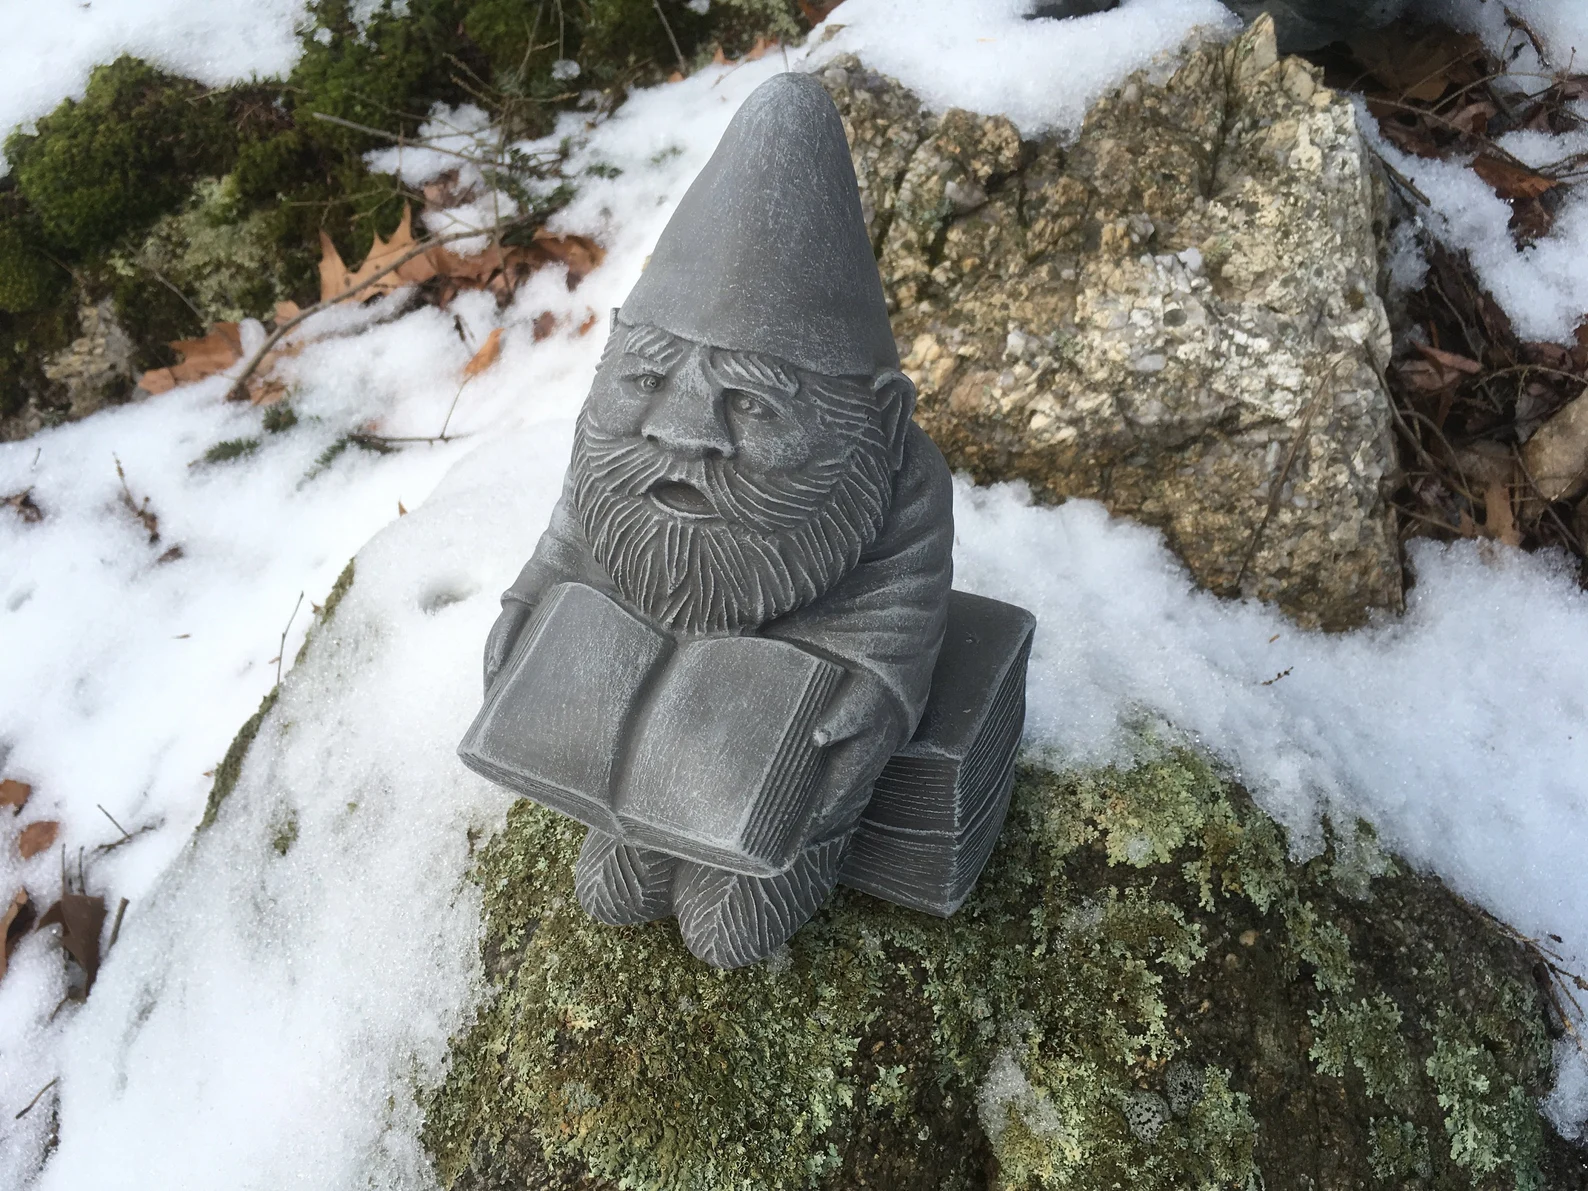 A small silver statue of a gnome with a long beard and pointed hat, sitting on a stack of books with another open book in his hands.